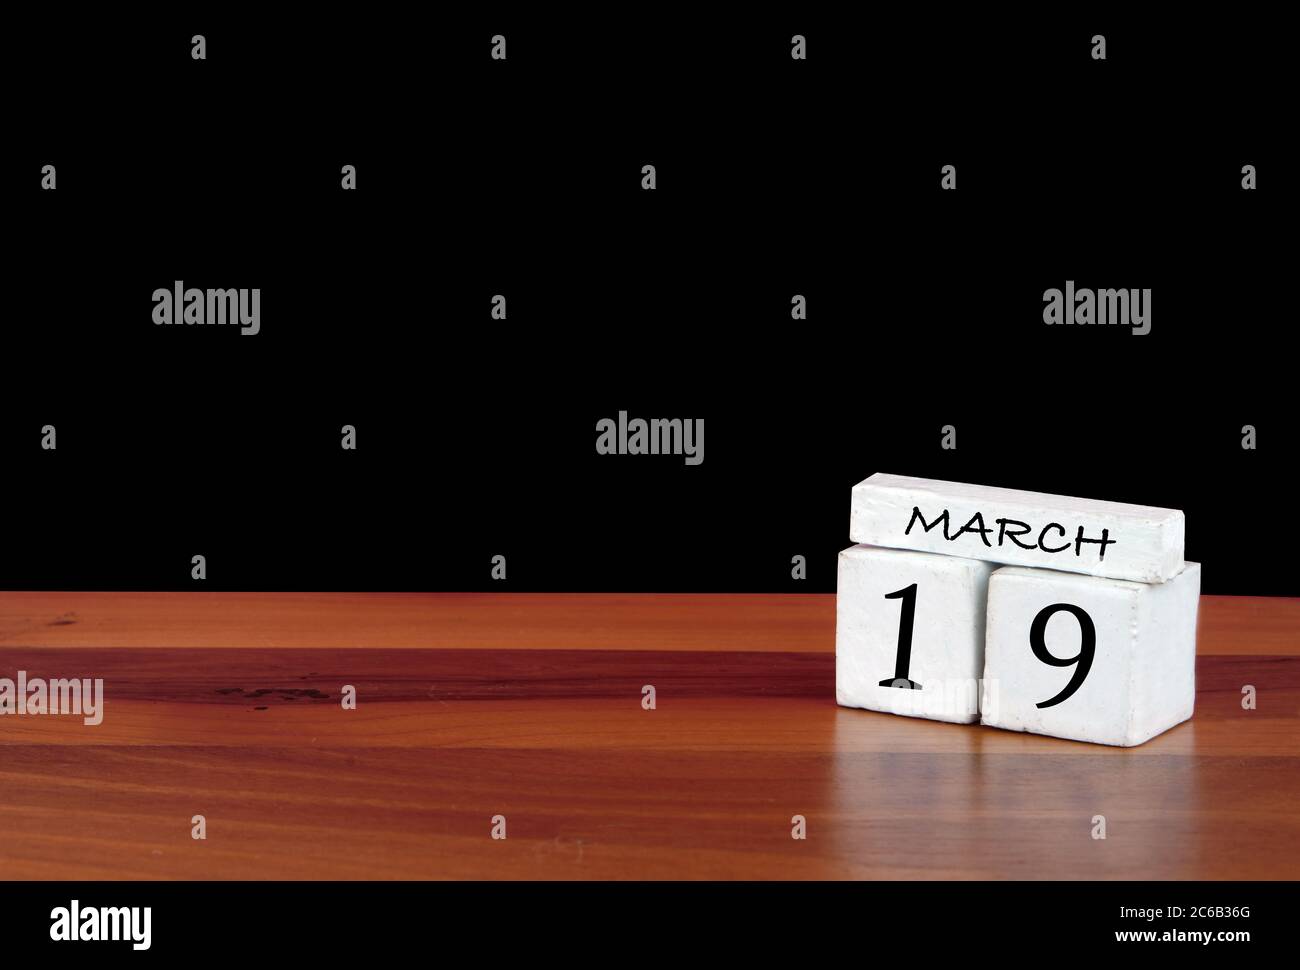 19 March calendar month. 19 days of the month. Reflected calendar on wooden floor with black background Stock Photo